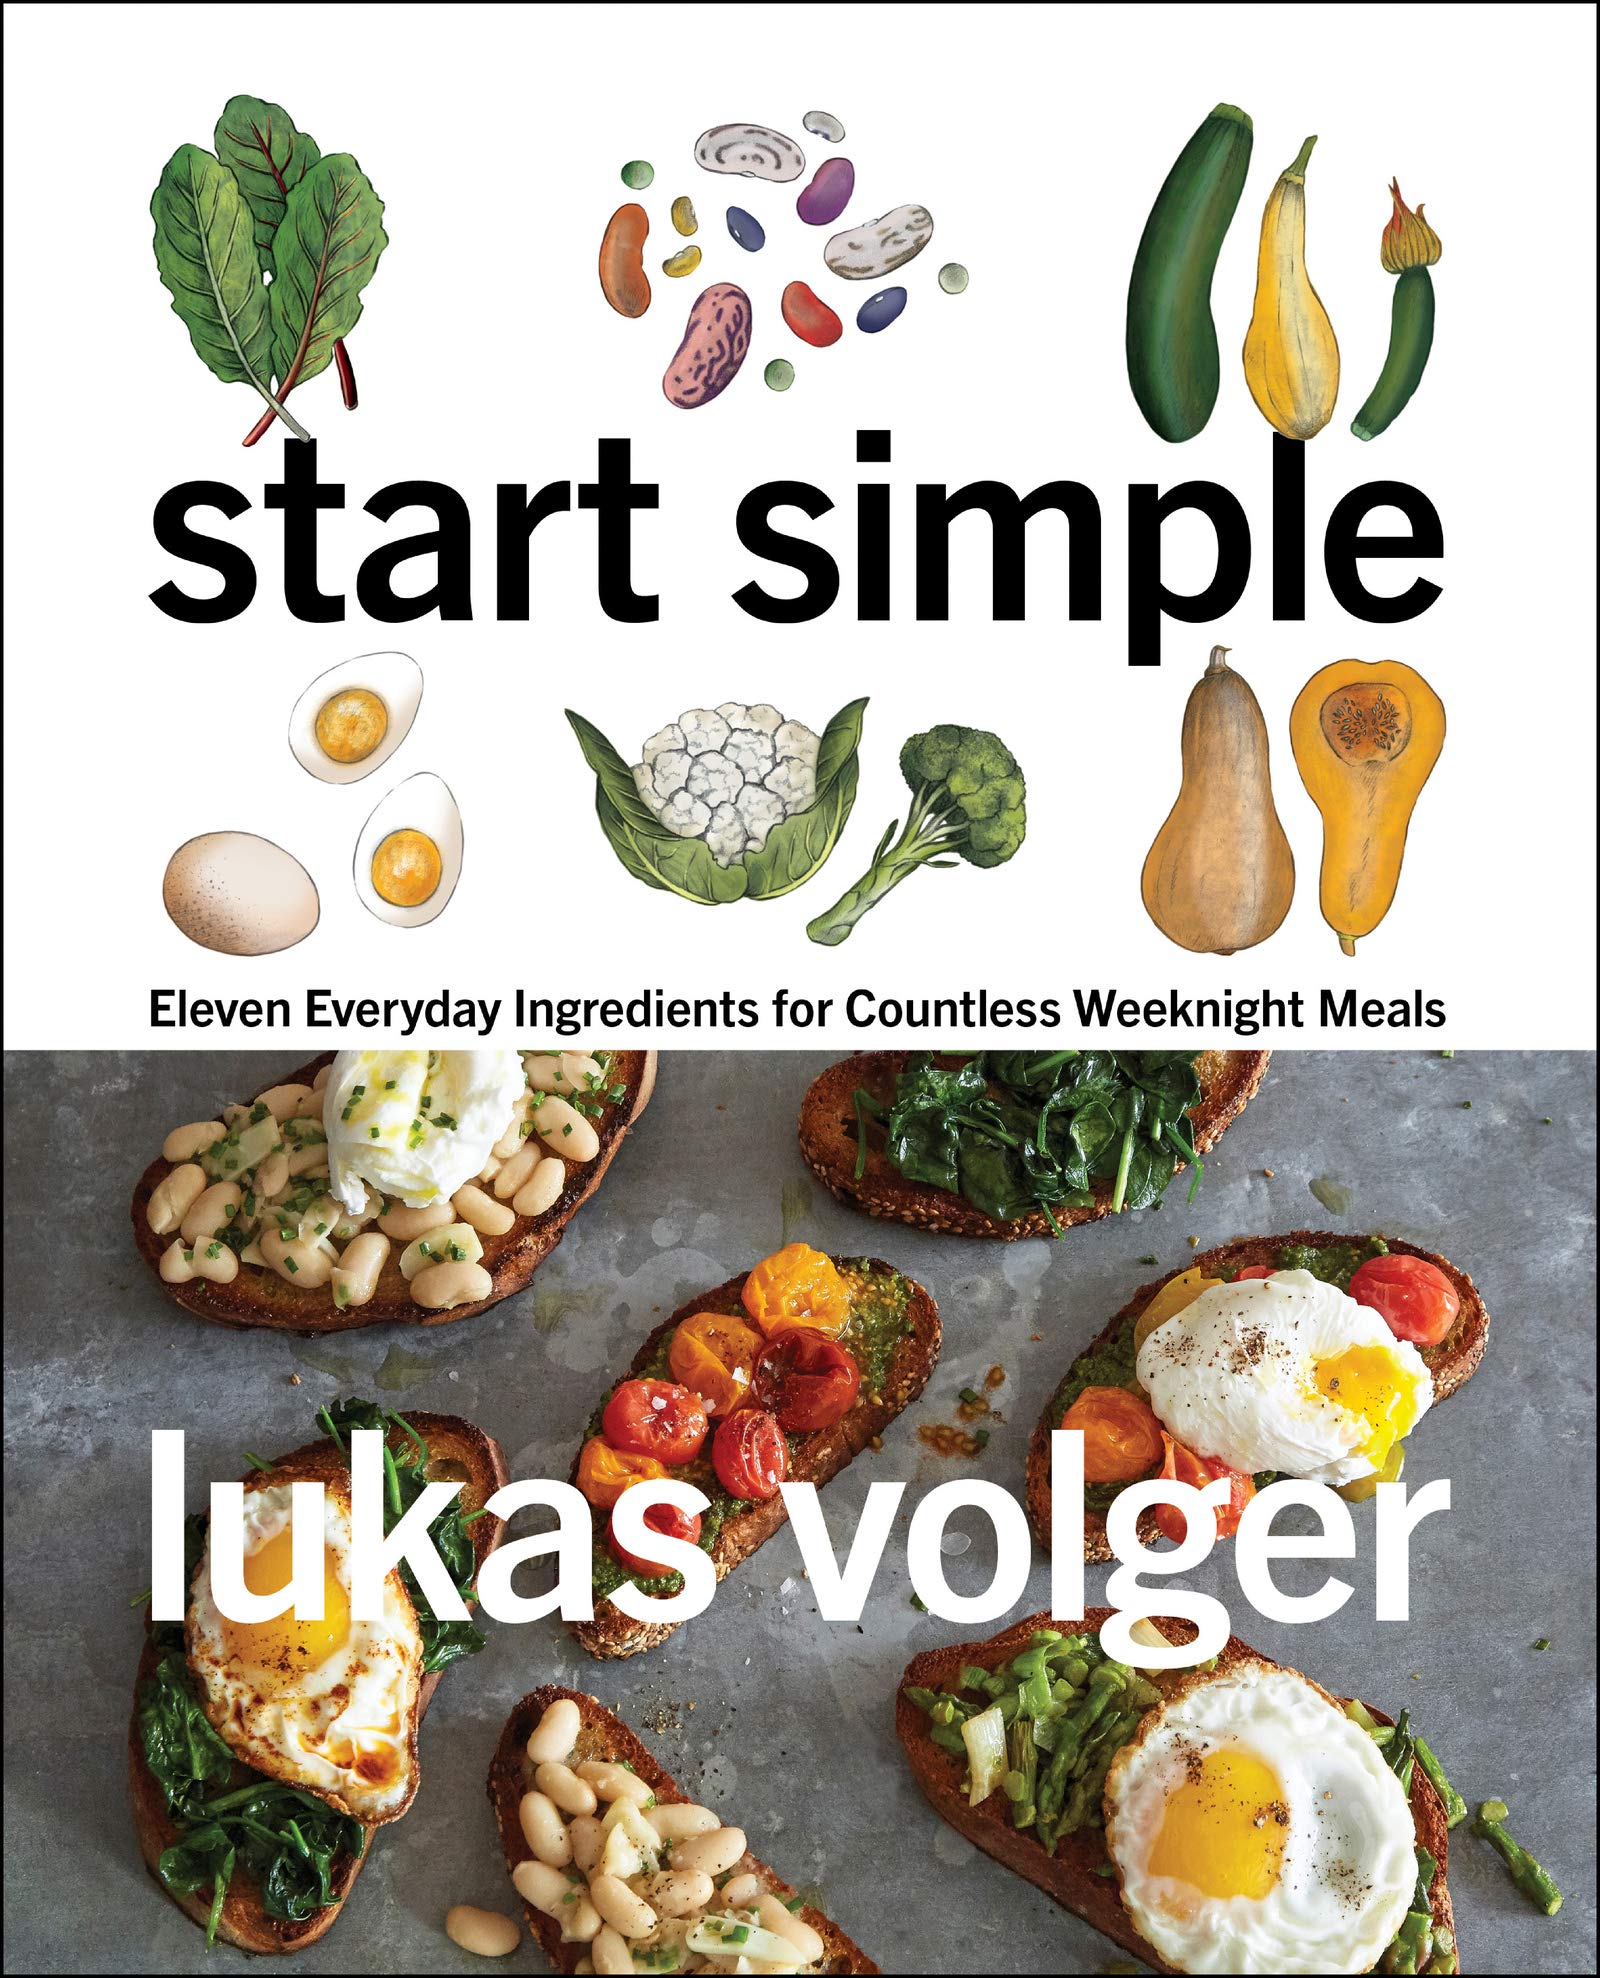  Start Simple: Eleven Everyday Ingredients for Countless Weeknight Meals